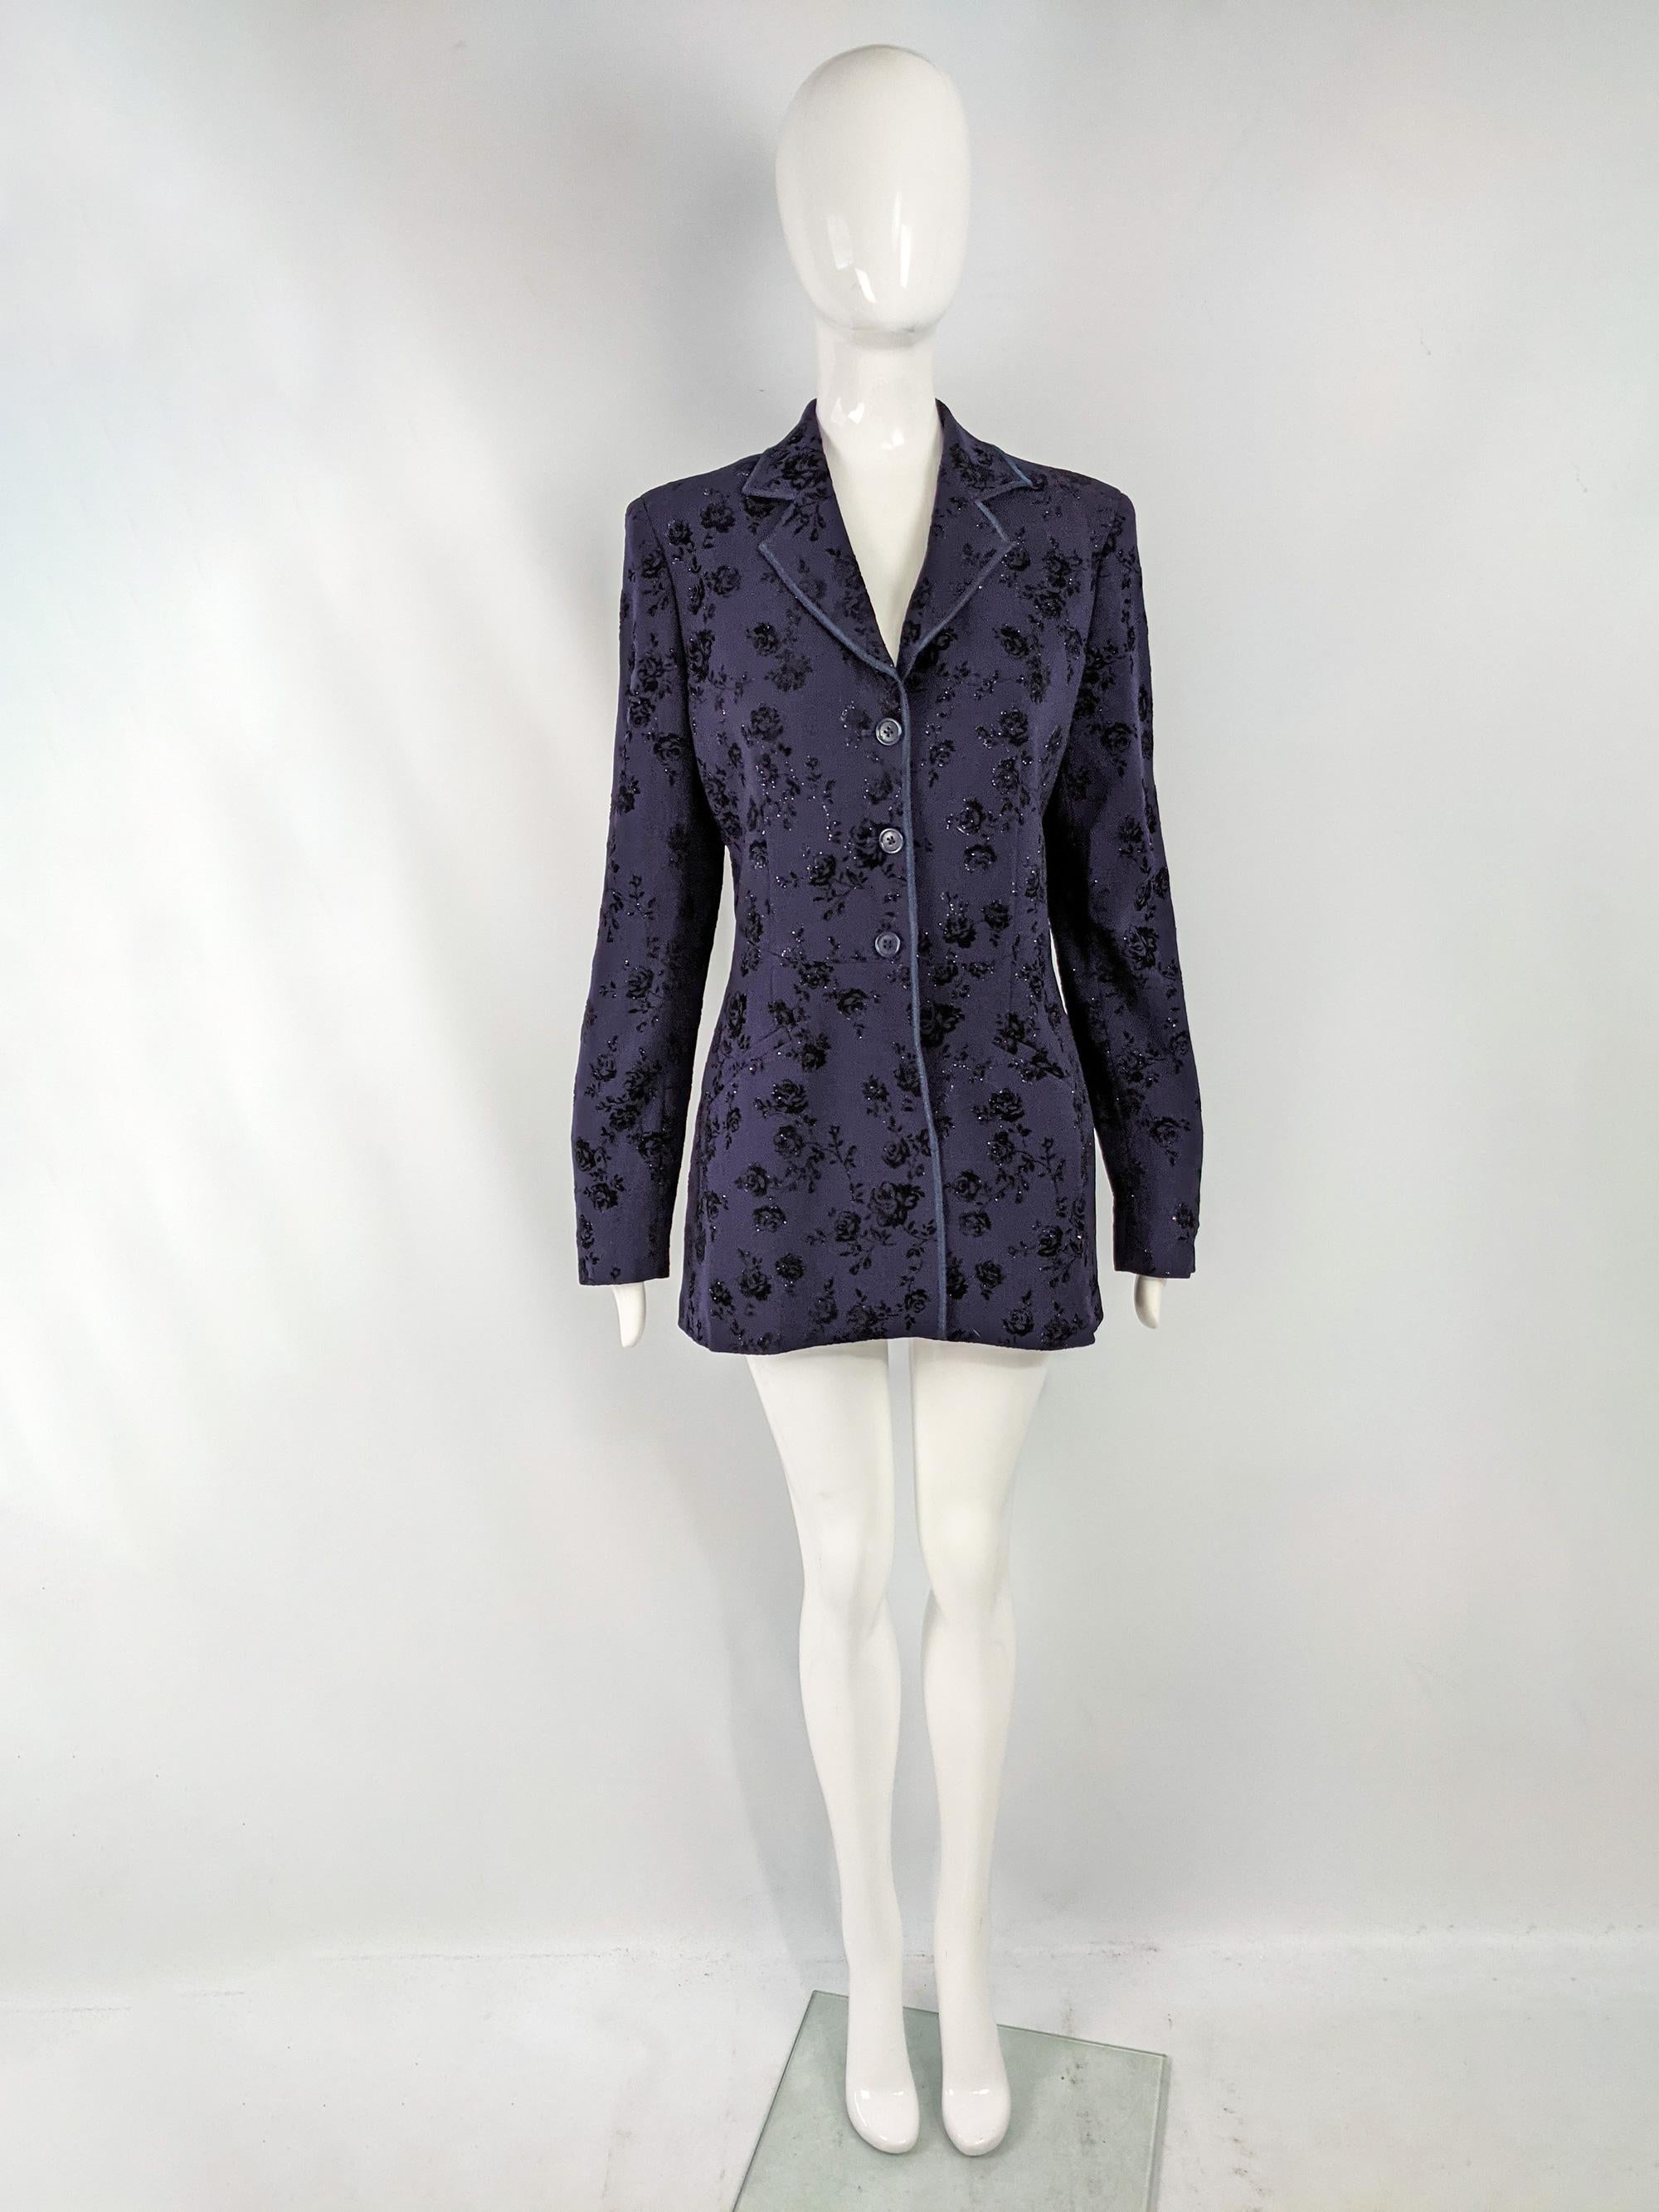 A beautiful vintage womens blazer jacket from the 90s by luxury fashion designer, Rifat Ozbek for the Future Ozbek line. In a dark purple (with a blue tone, almost navy) with a sparkly flocked velvet floral pattern, would make a great evening